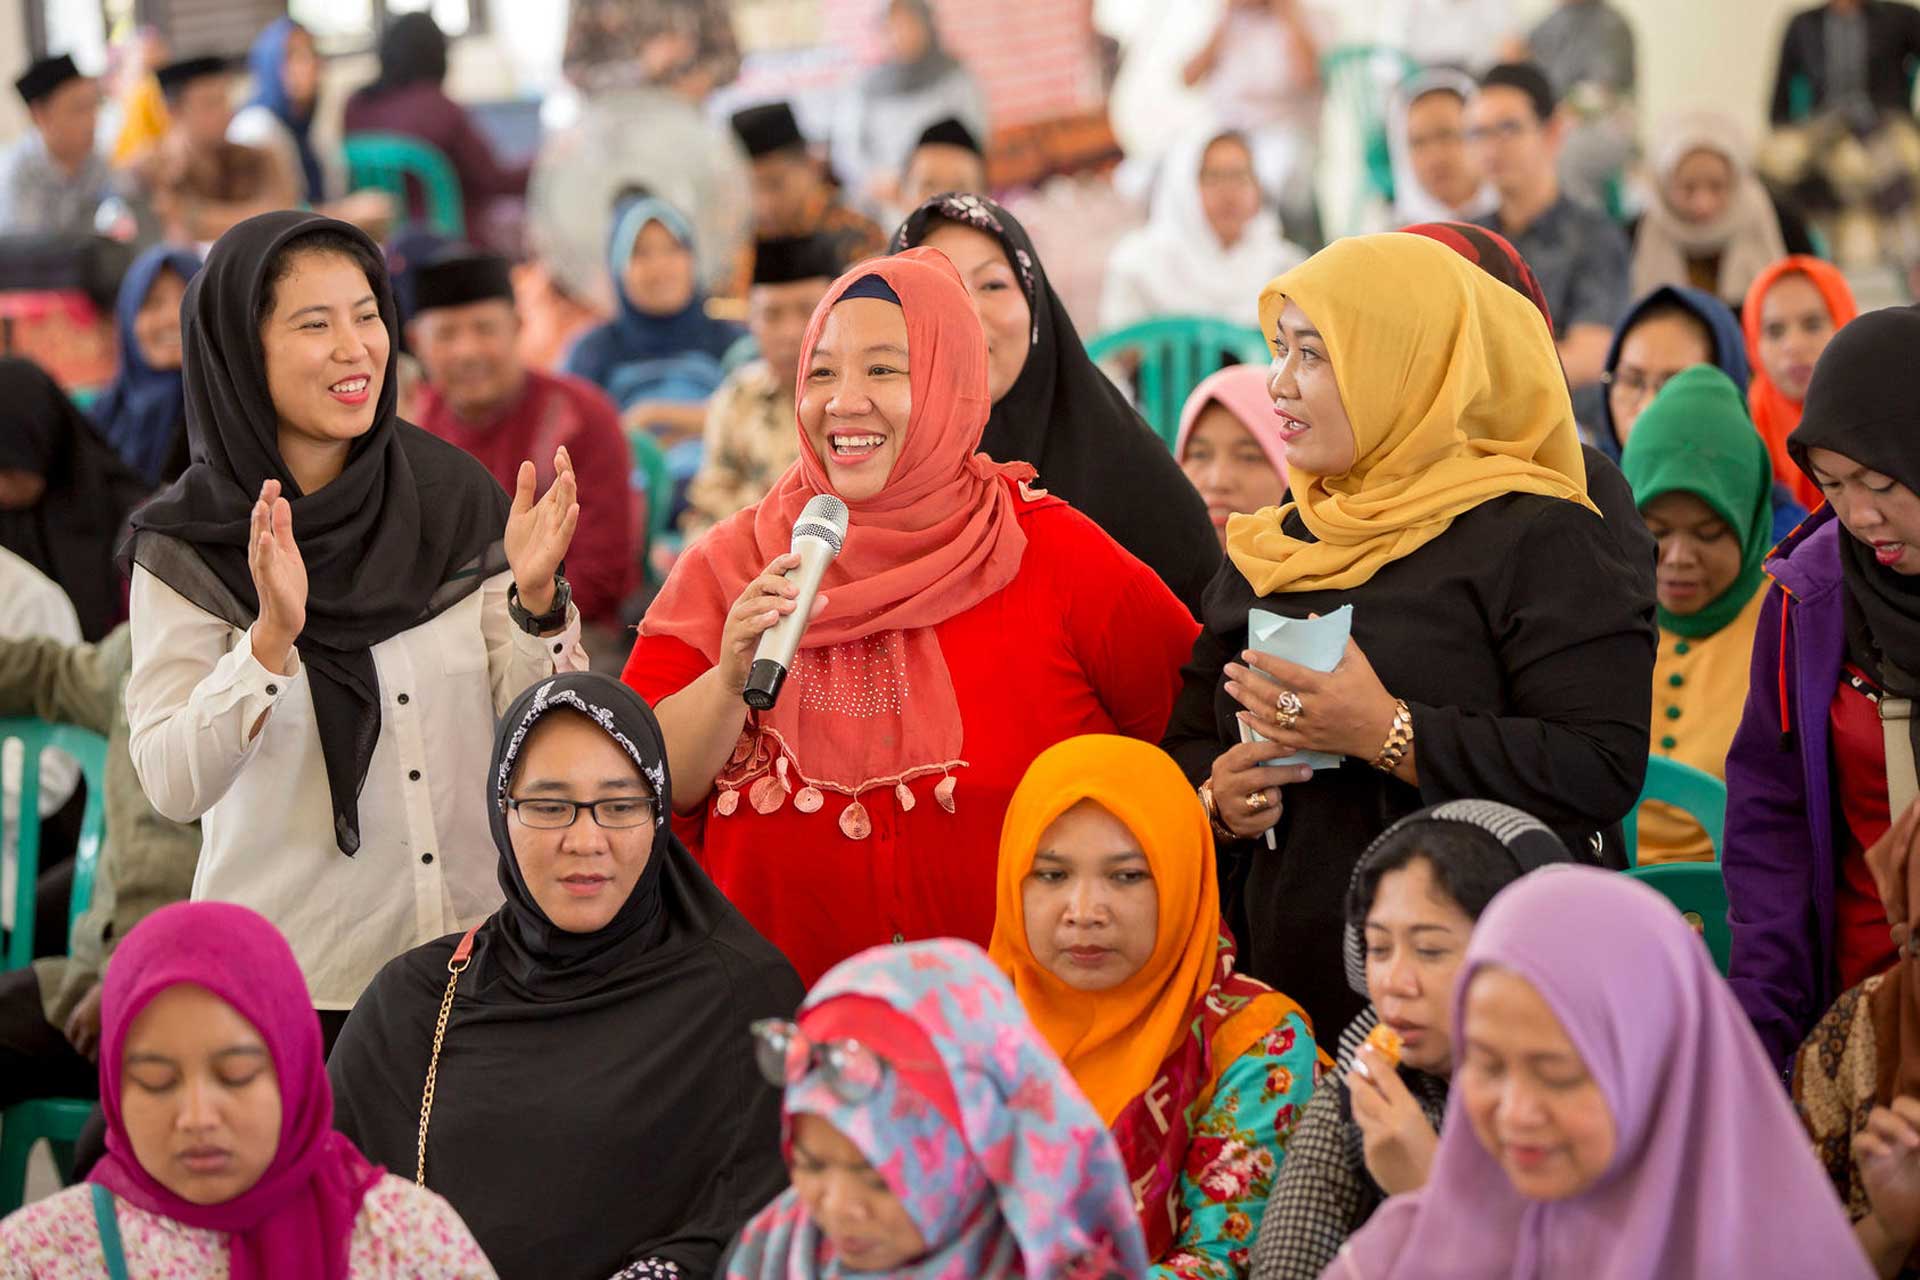 A scene from community discussions at the massive gathering in Pesantren Annuqqayah, Indonesia.